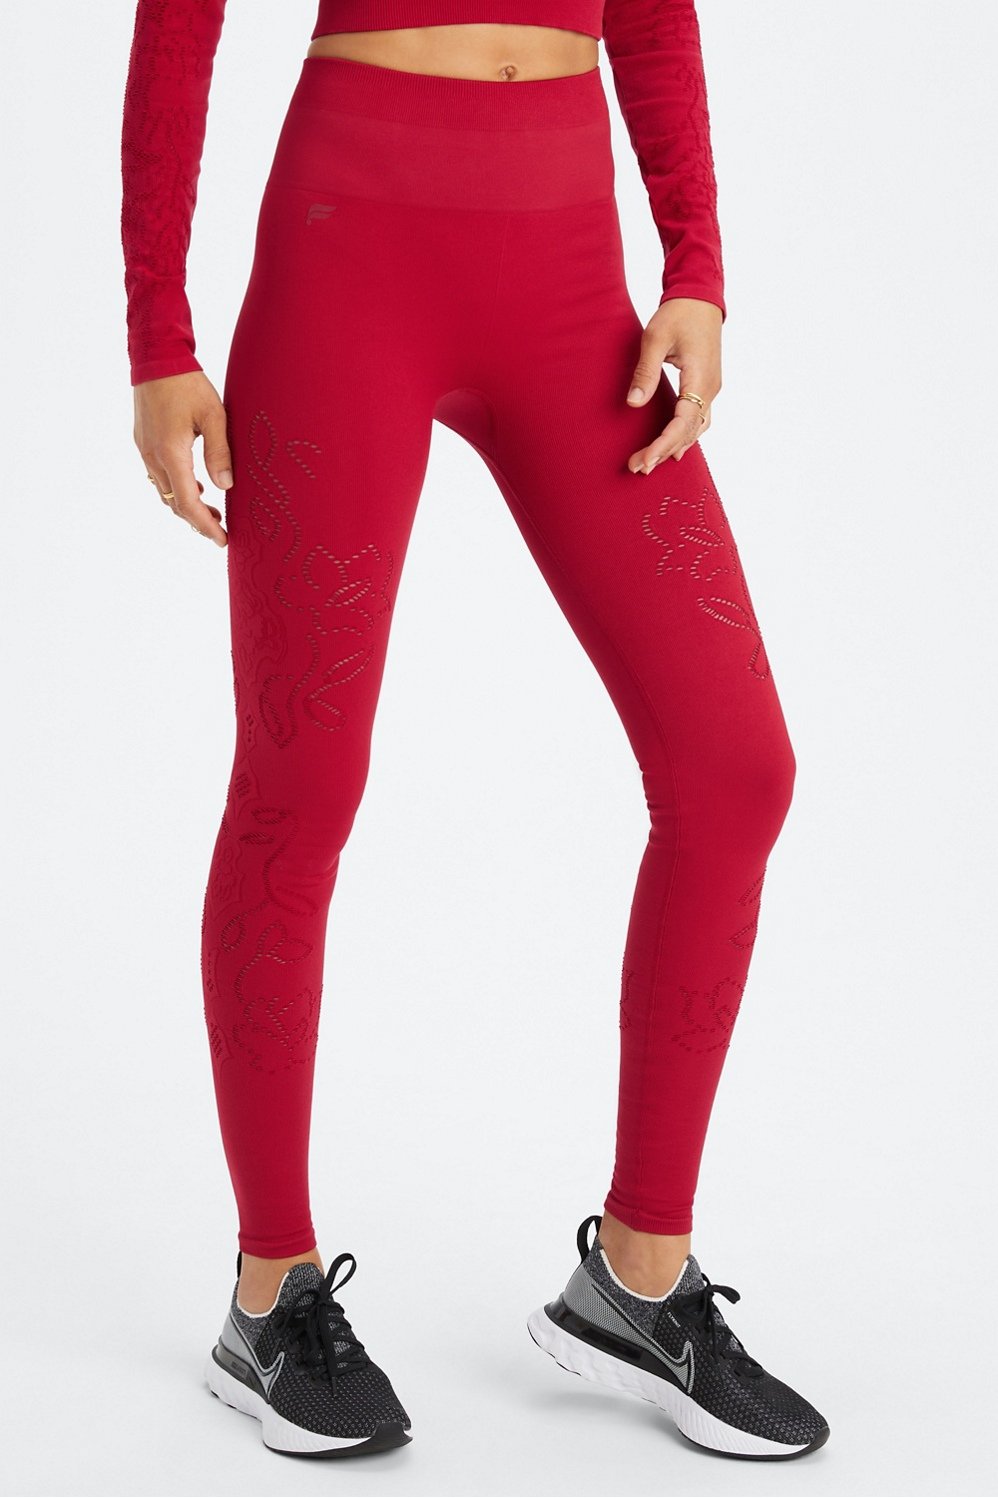 High-Waisted Lace Seamless Leggings